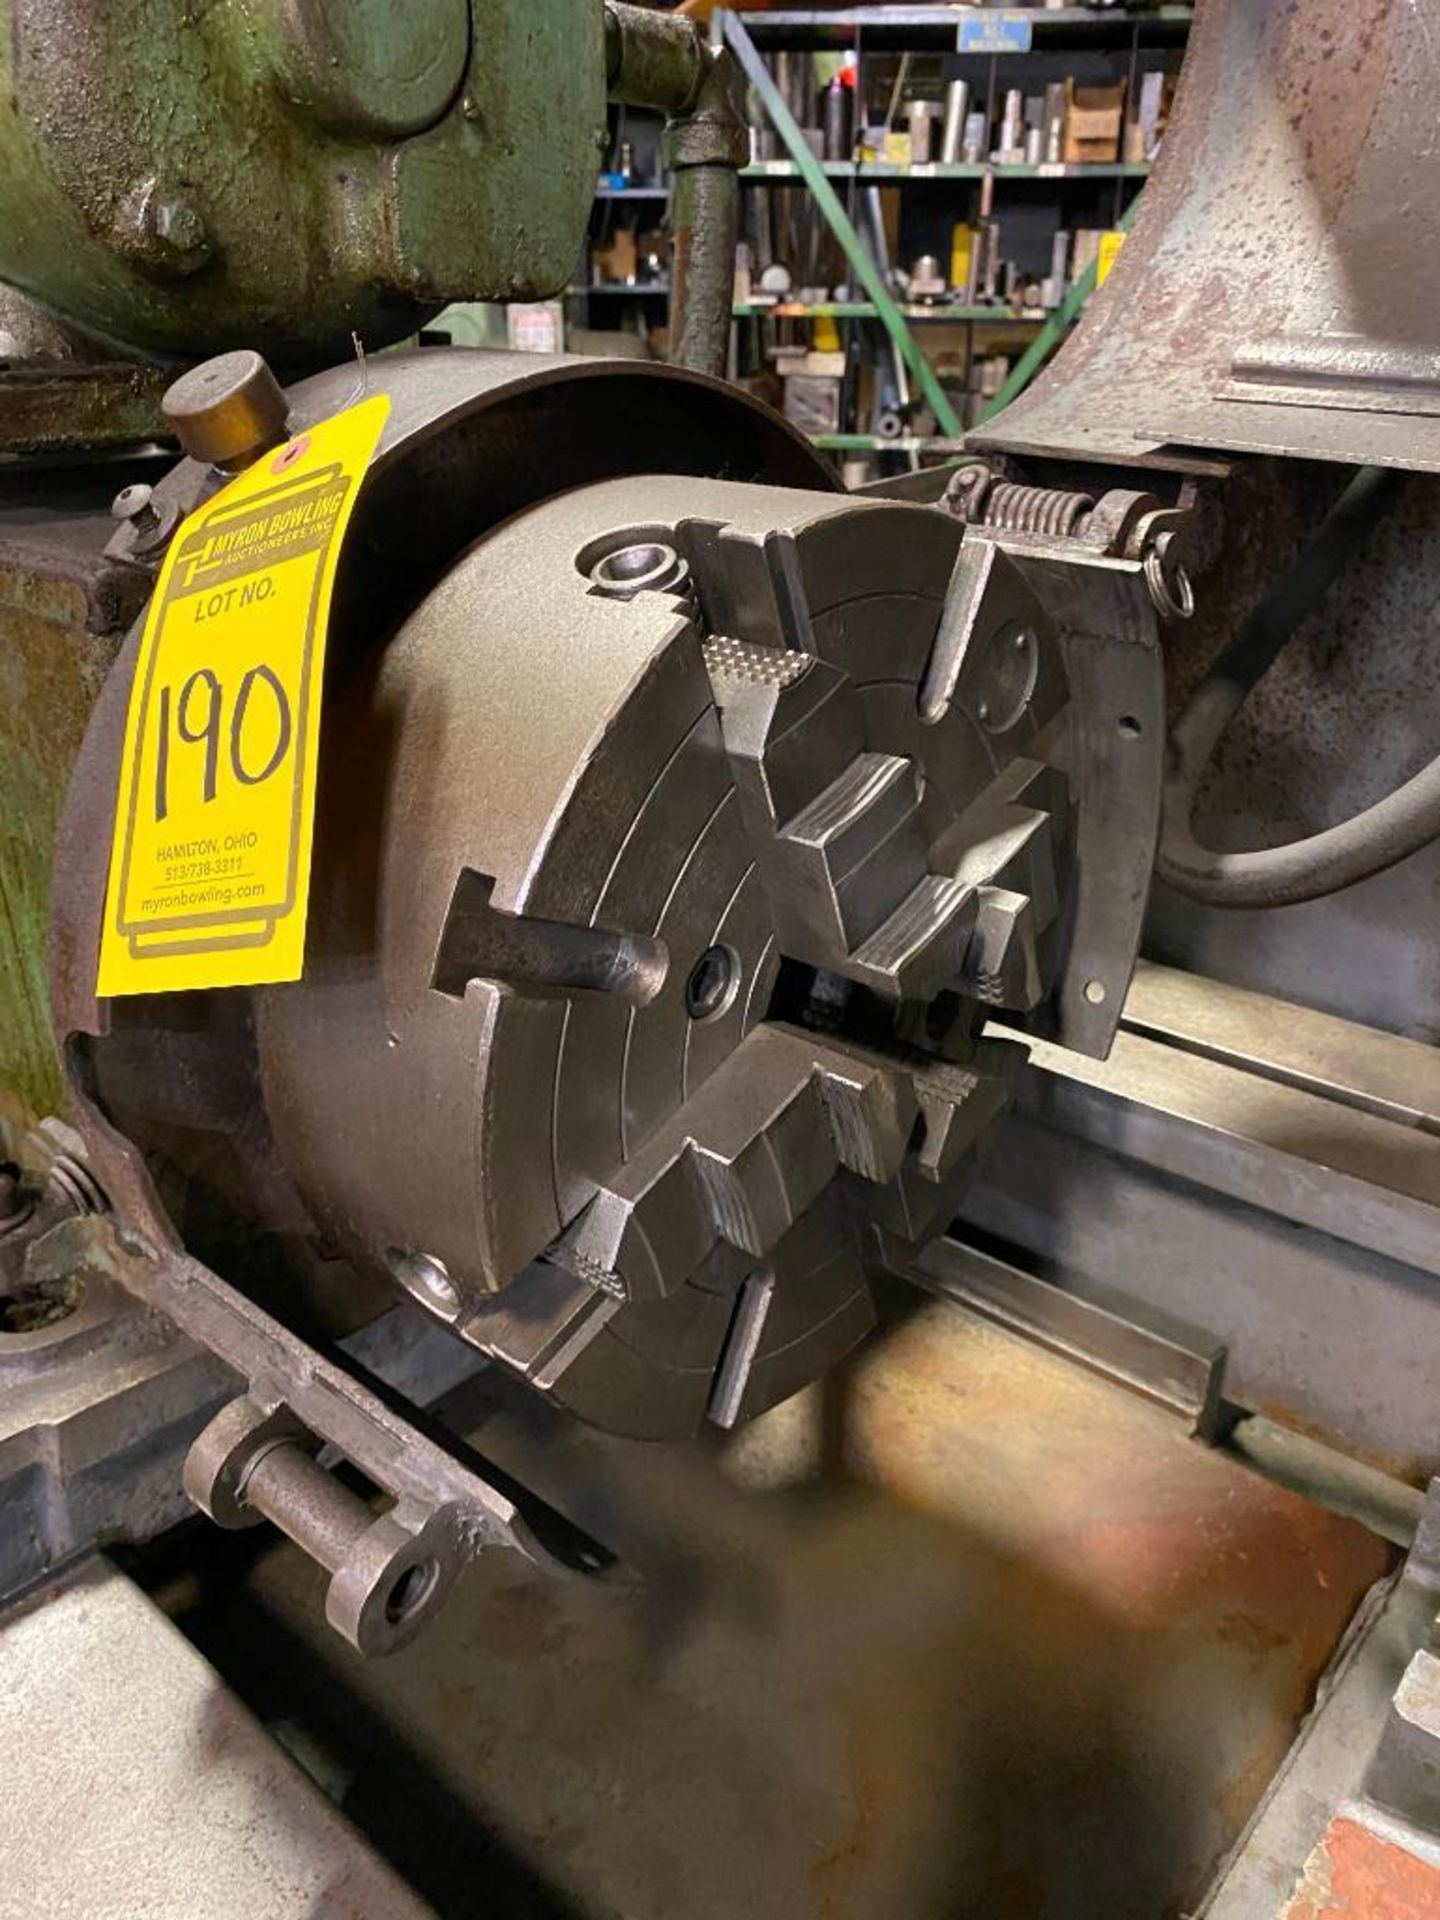 Heald Universal Grinder, model 273a, 12" 4-Jaw Chuck, Red Head Grinder Attachment - Image 3 of 4